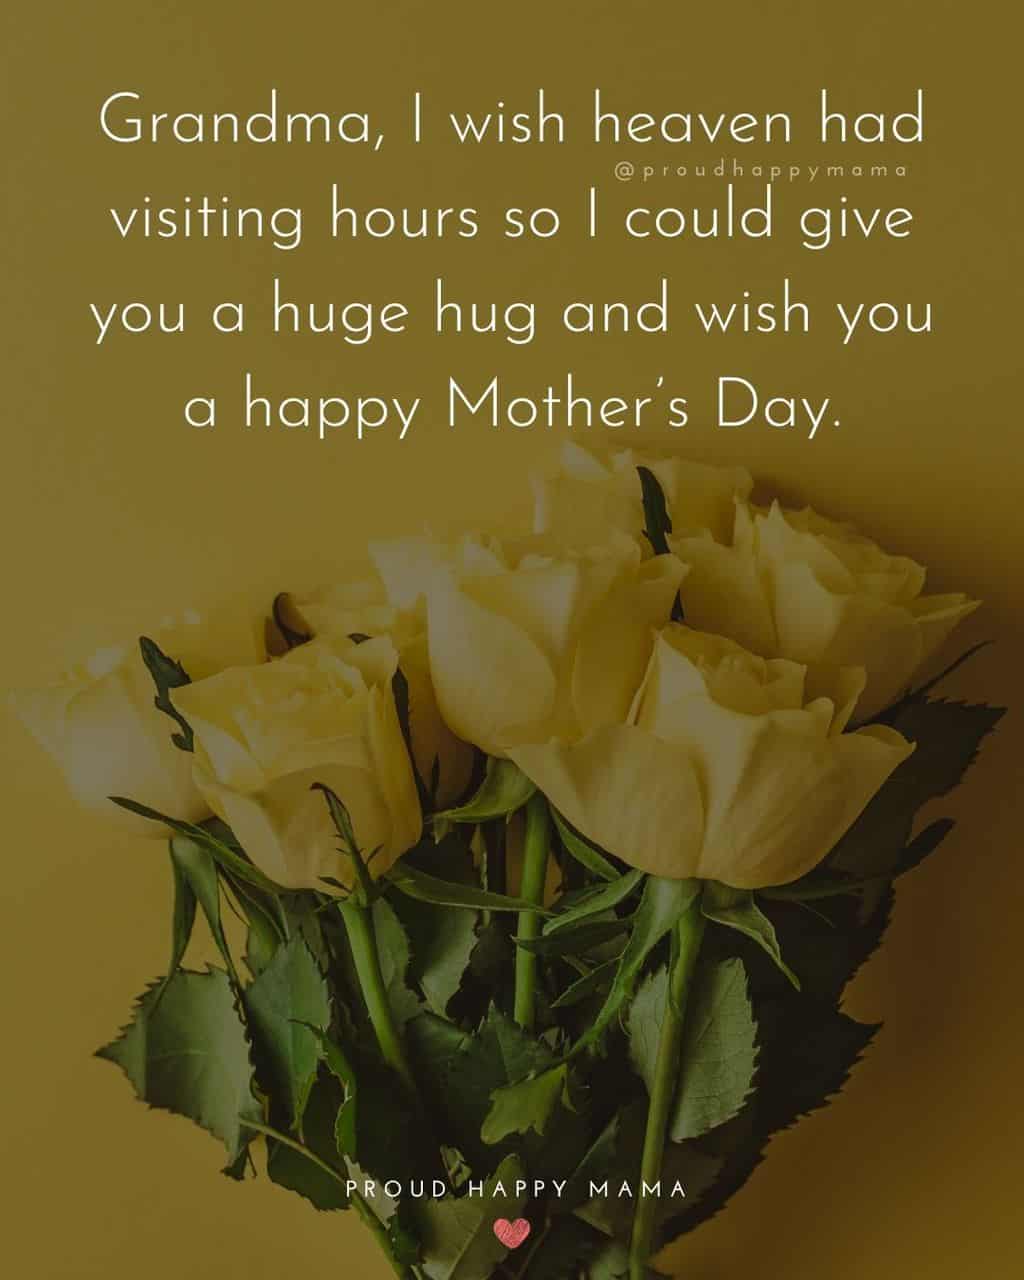 Happy Mothers Day Quotes To Grandma - Grandma, I wish heaven had visiting hours so I could give you a huge hug and